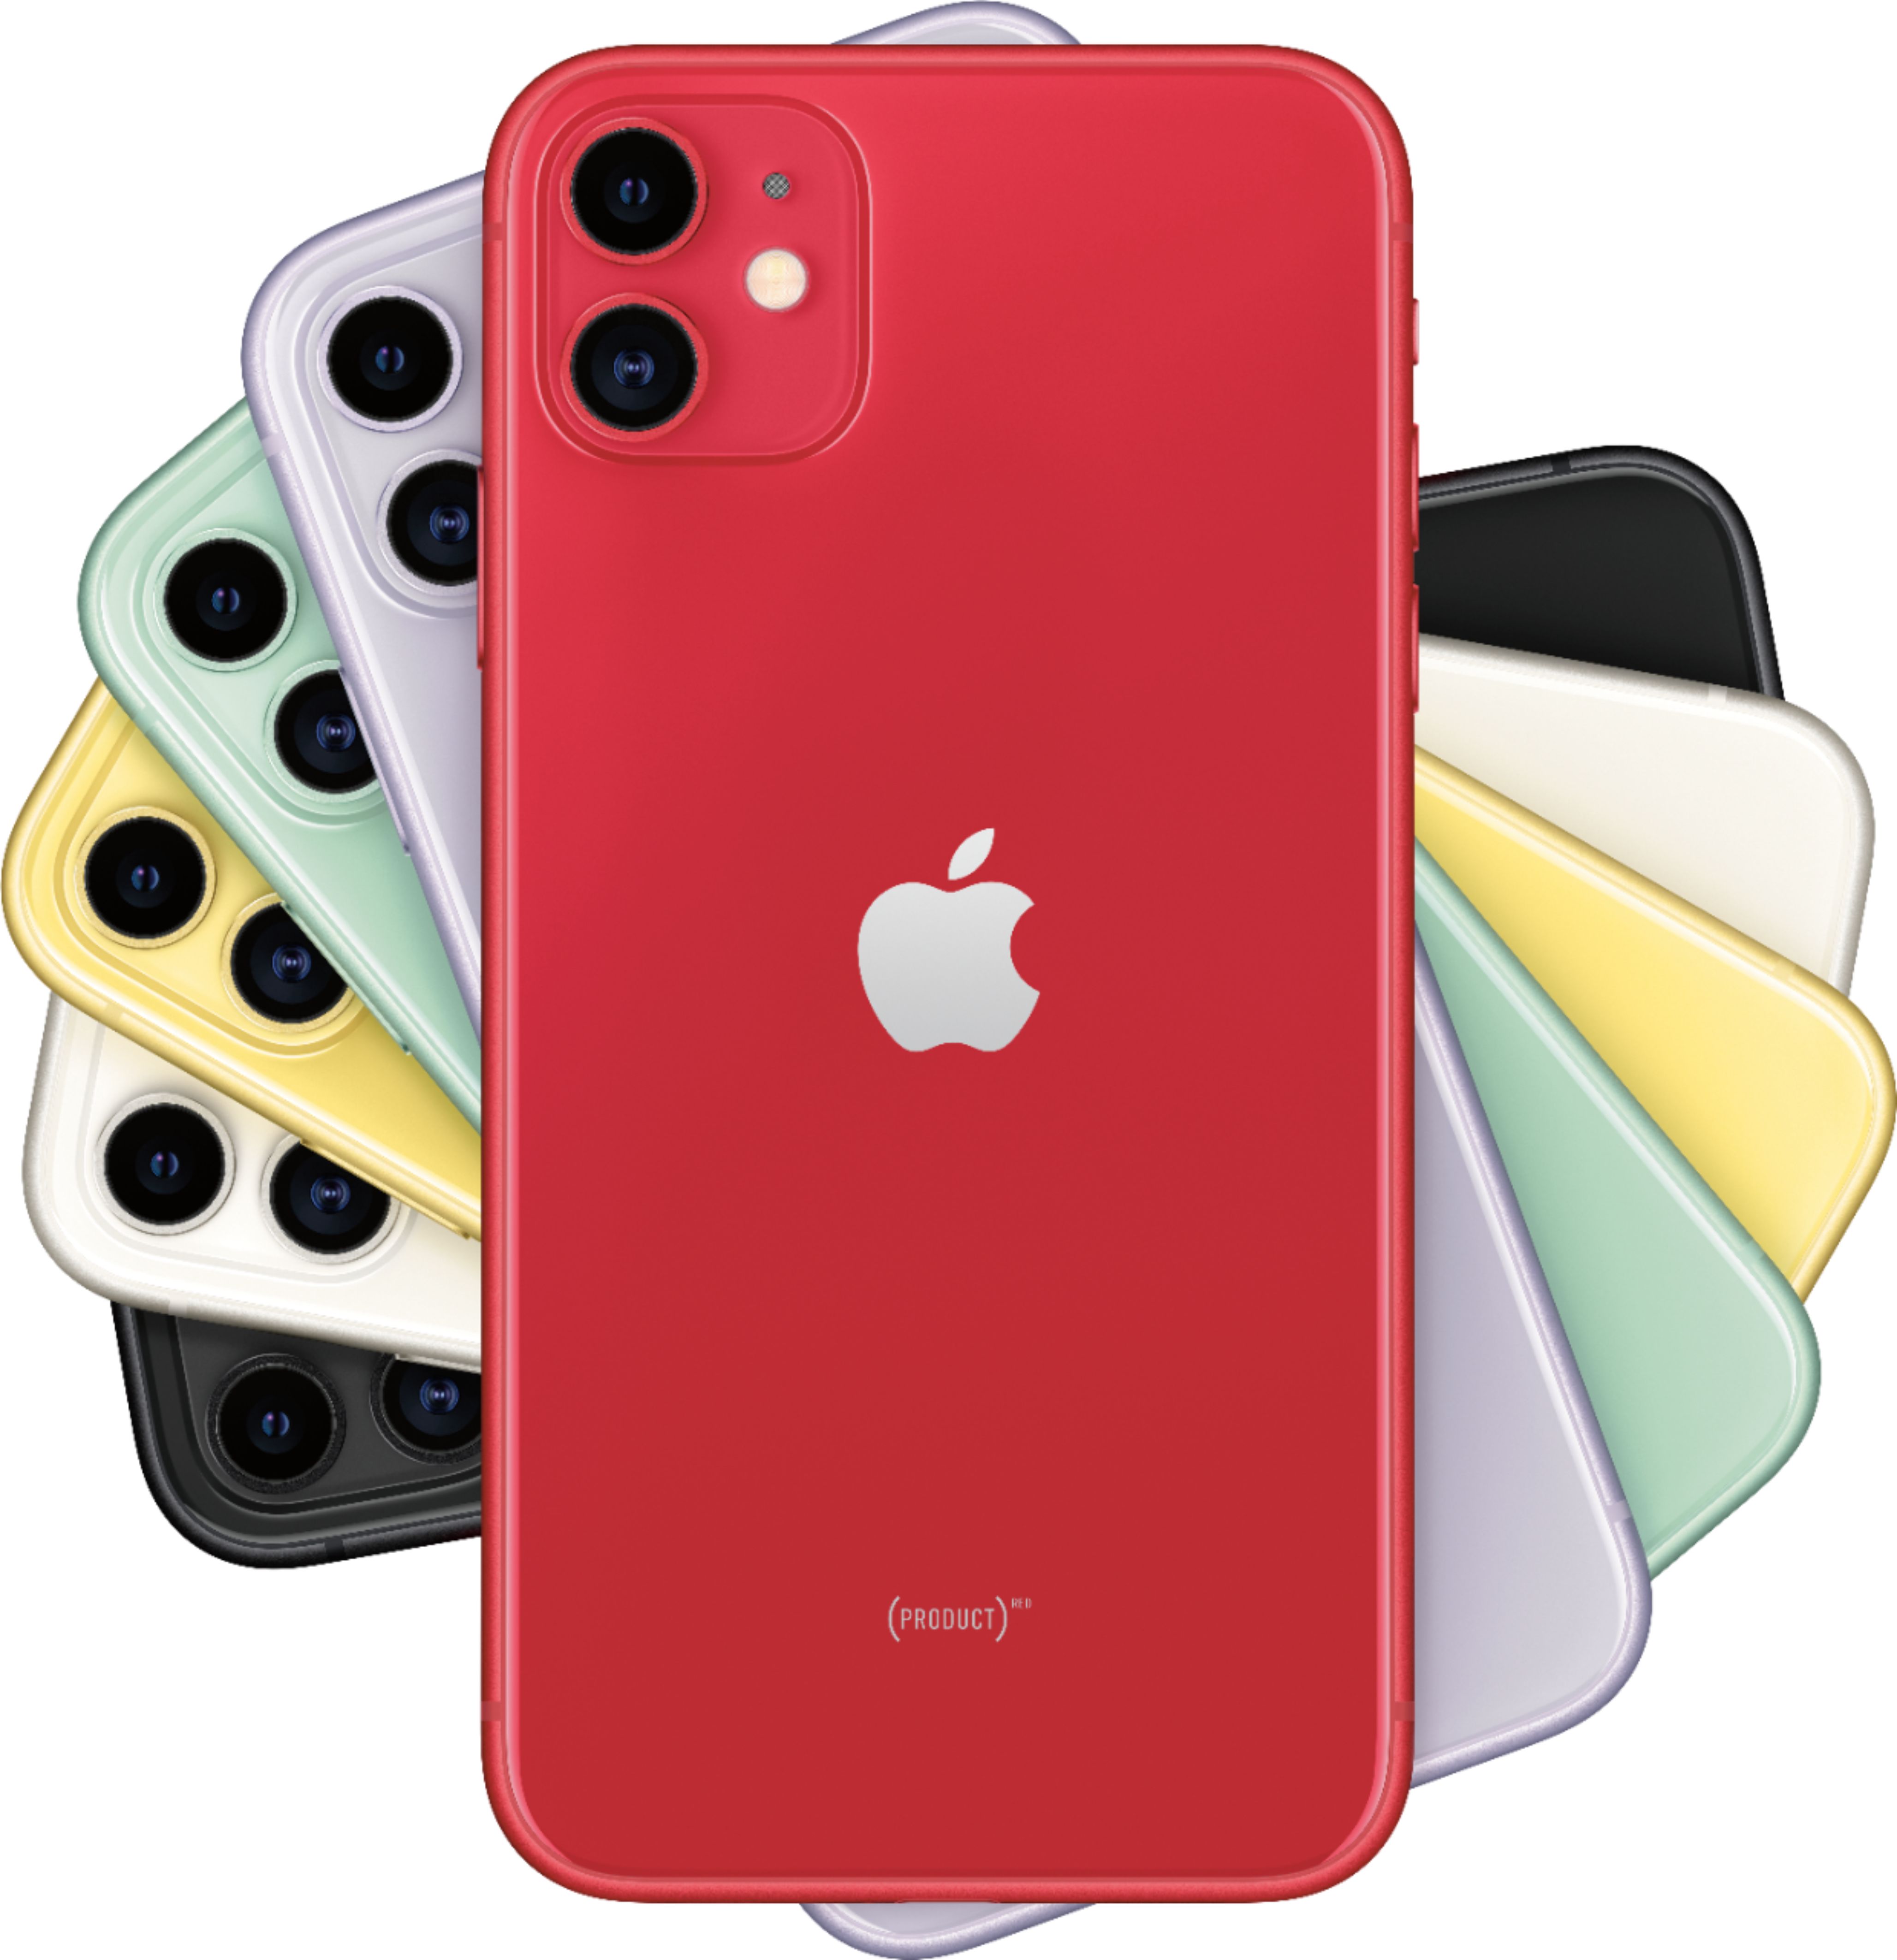 Apple iPhone 11 64GB (PRODUCT)RED (Sprint - Best Buy